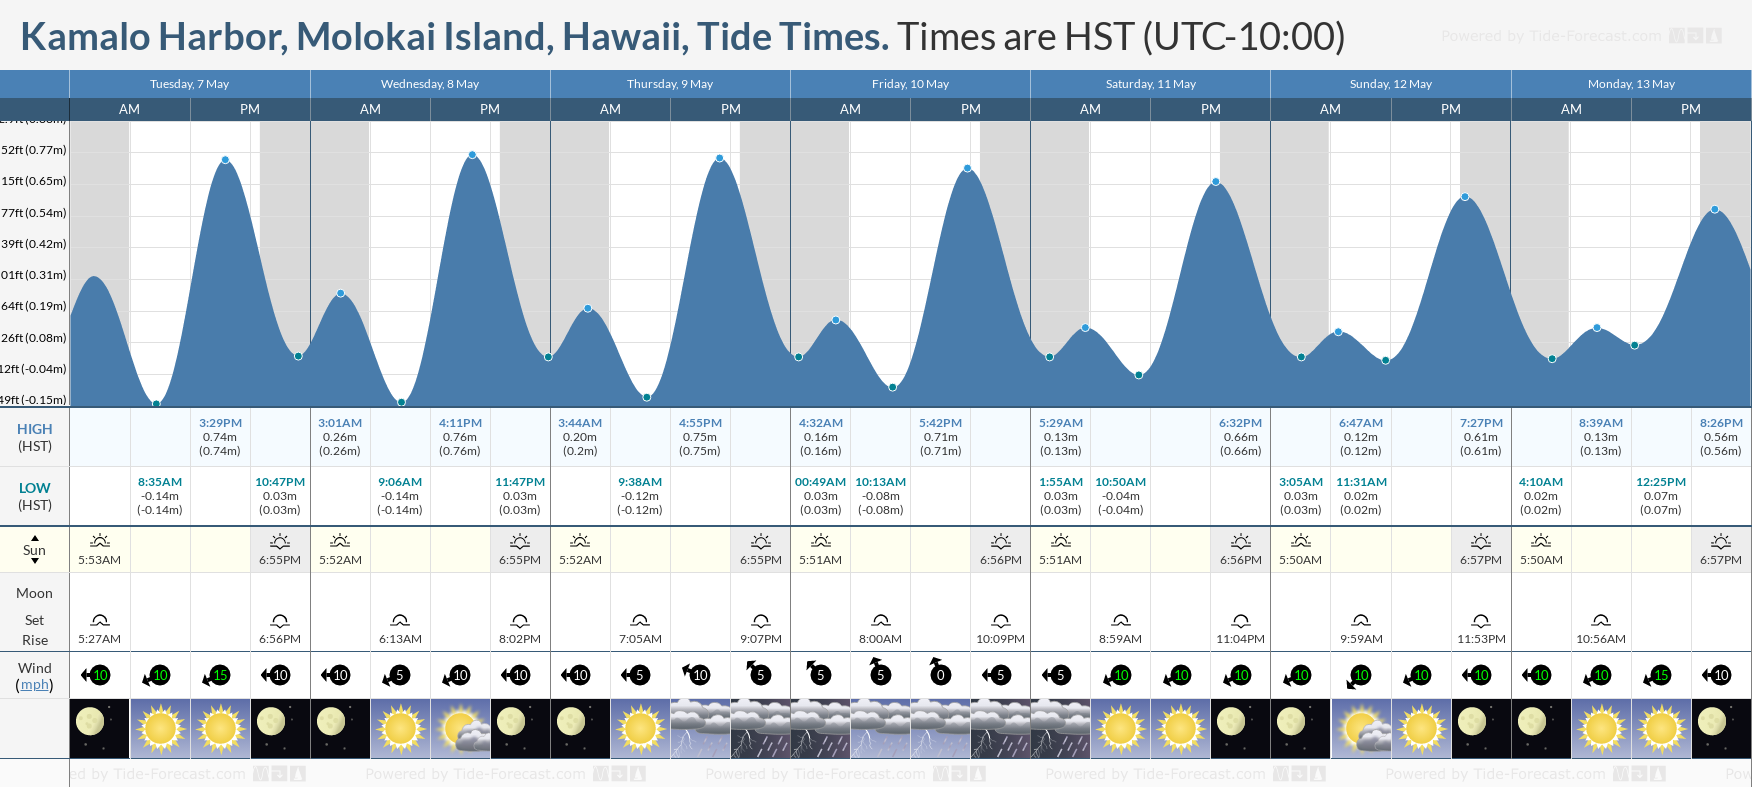 Kamalo Harbor, Molokai Island, Hawaii Tide Chart including high and low tide tide times for the next 7 days